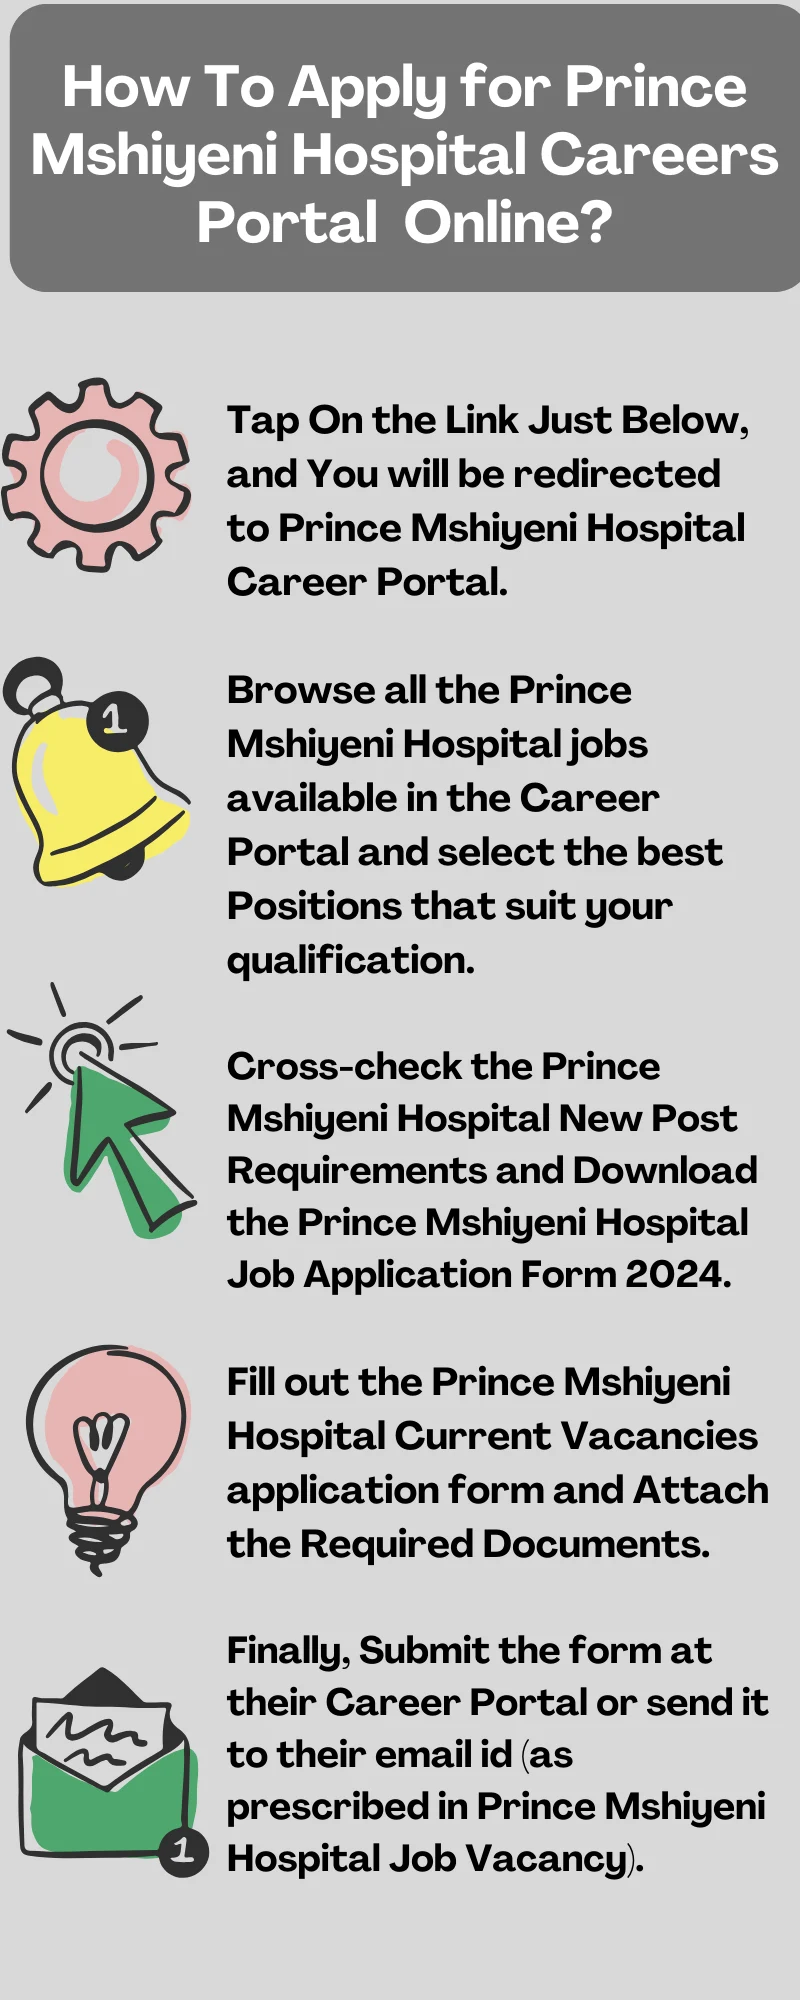 How To Apply for Prince Mshiyeni Hospital Careers Portal Online?